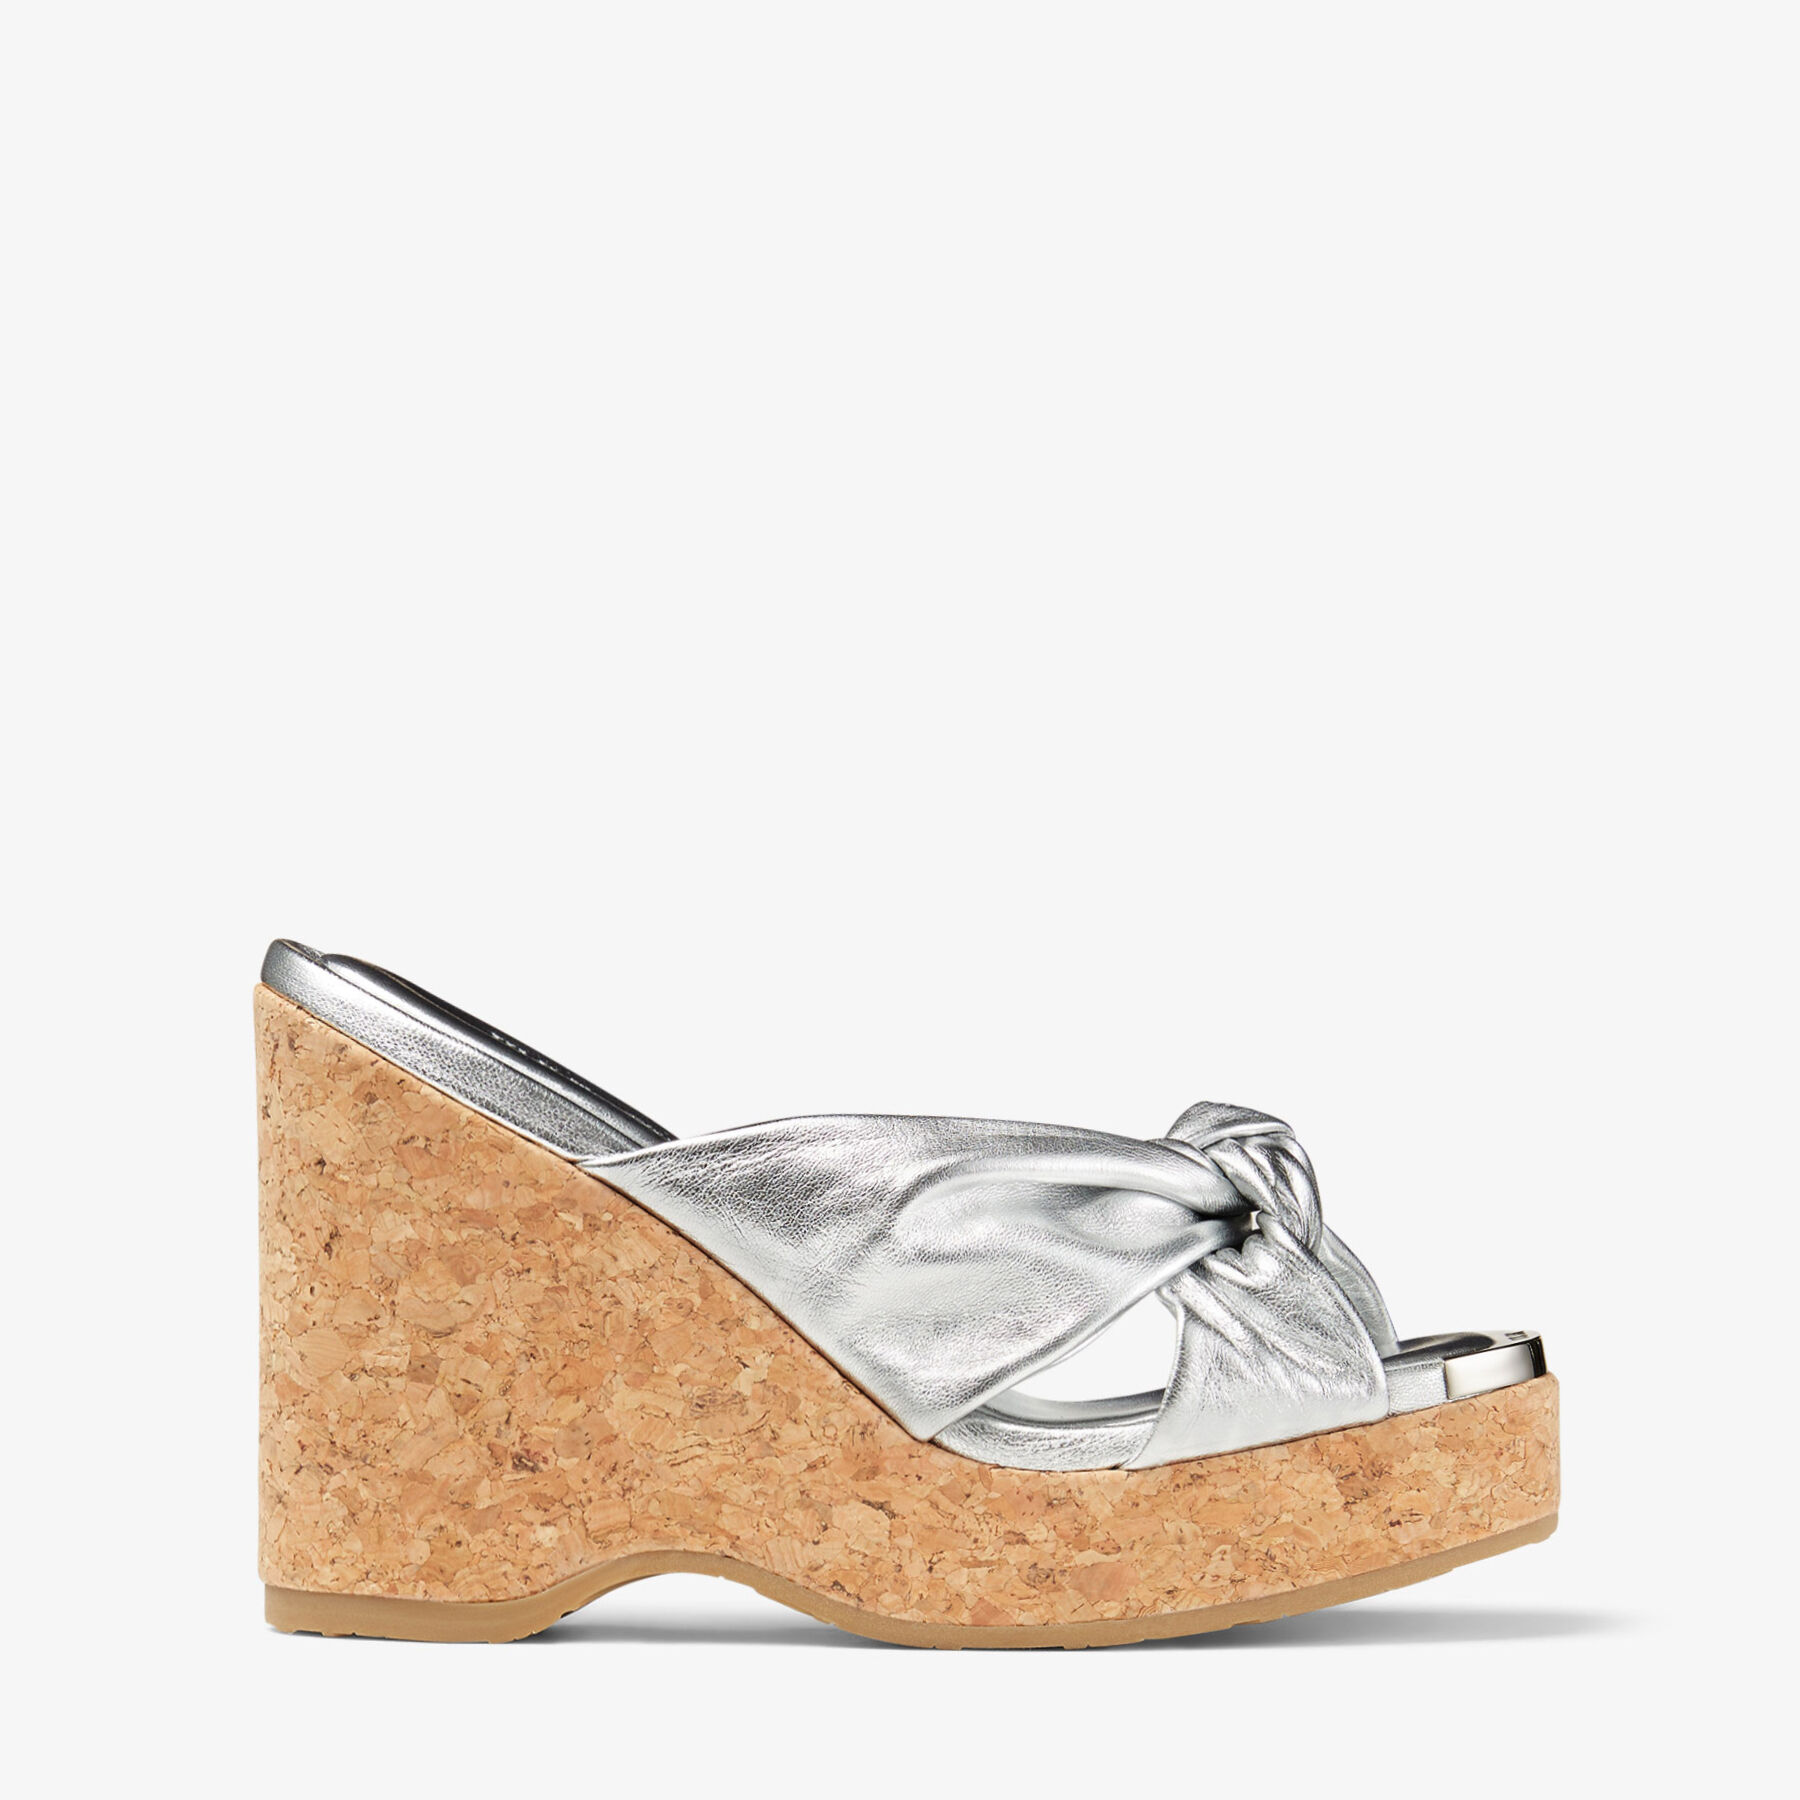 Avenue Wedge 110 | Silver Metallic Nappa Wedge Mules | New Collection ...